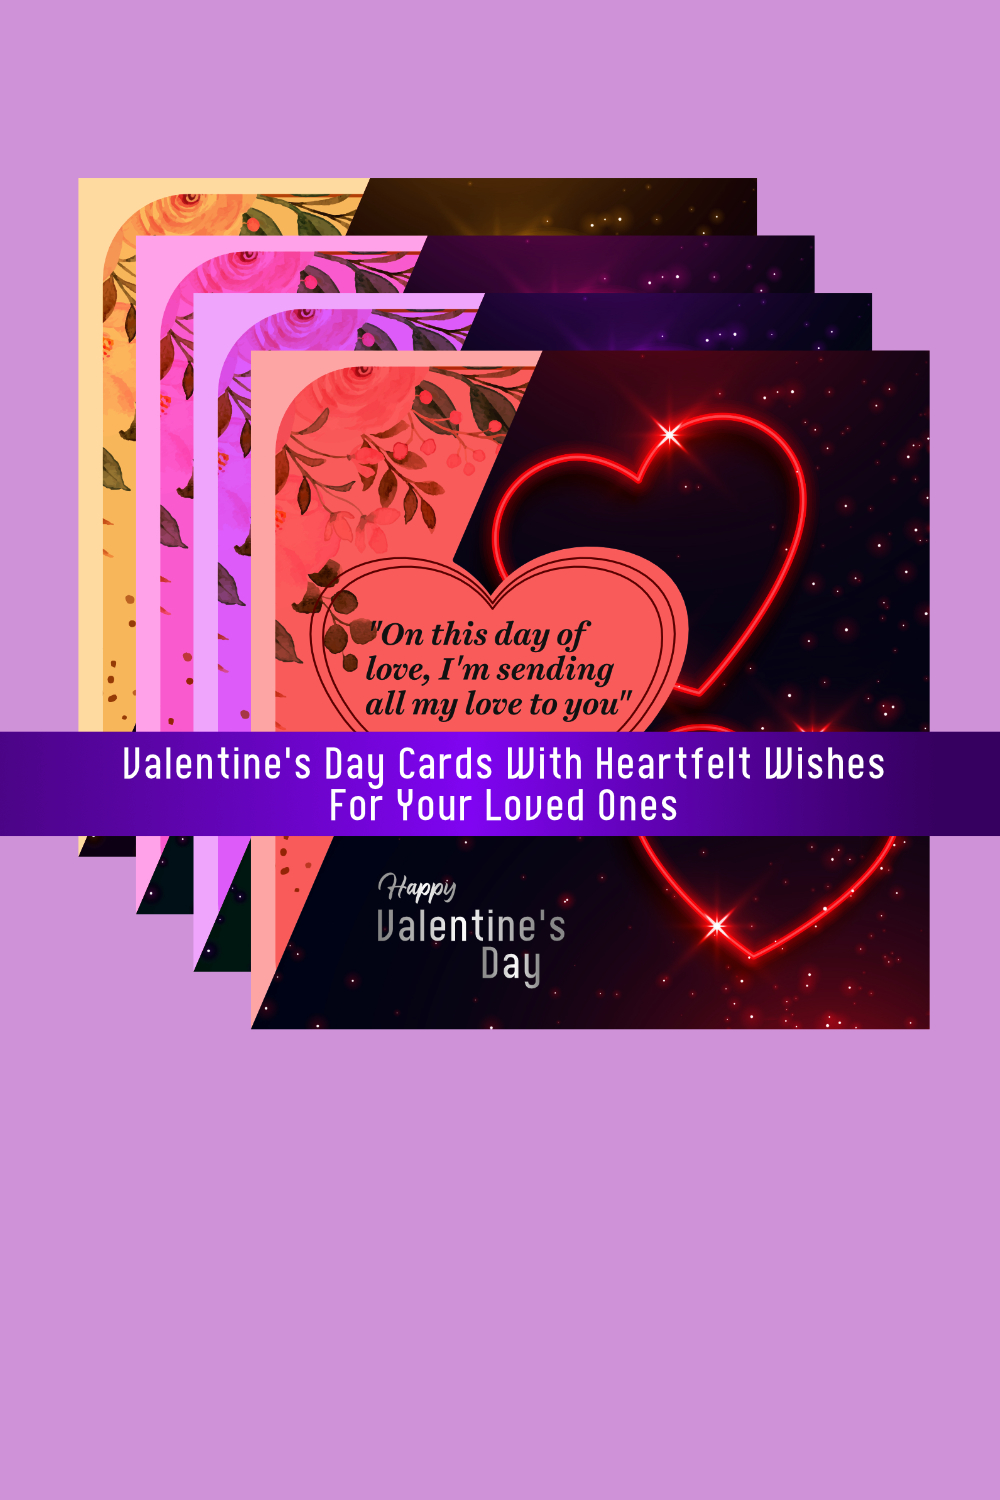 4 Beautifully Designed Vector Valentine’s Day Cards with Heartfelt Wishes for Your Loved Ones, Friends and Well-Wishers pinterest preview image.